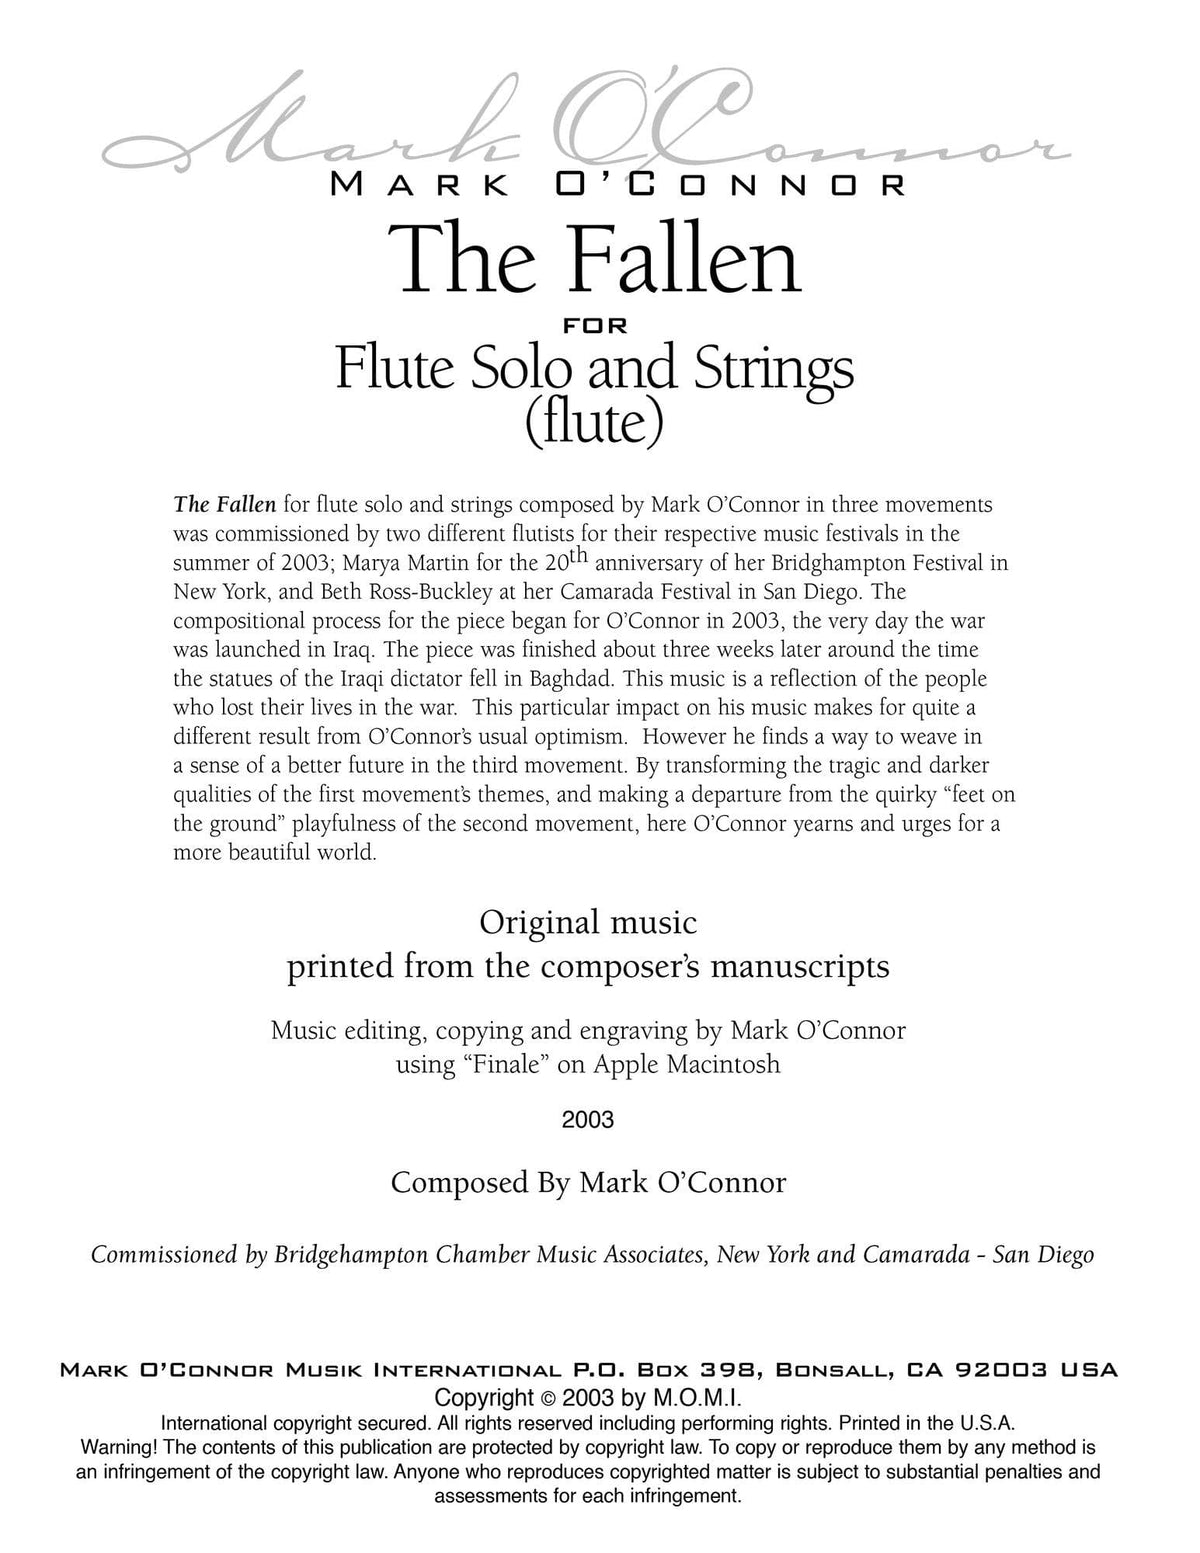 O'Connor, Mark - The Fallen for Flute and Strings - Flute Solo - Digital Download